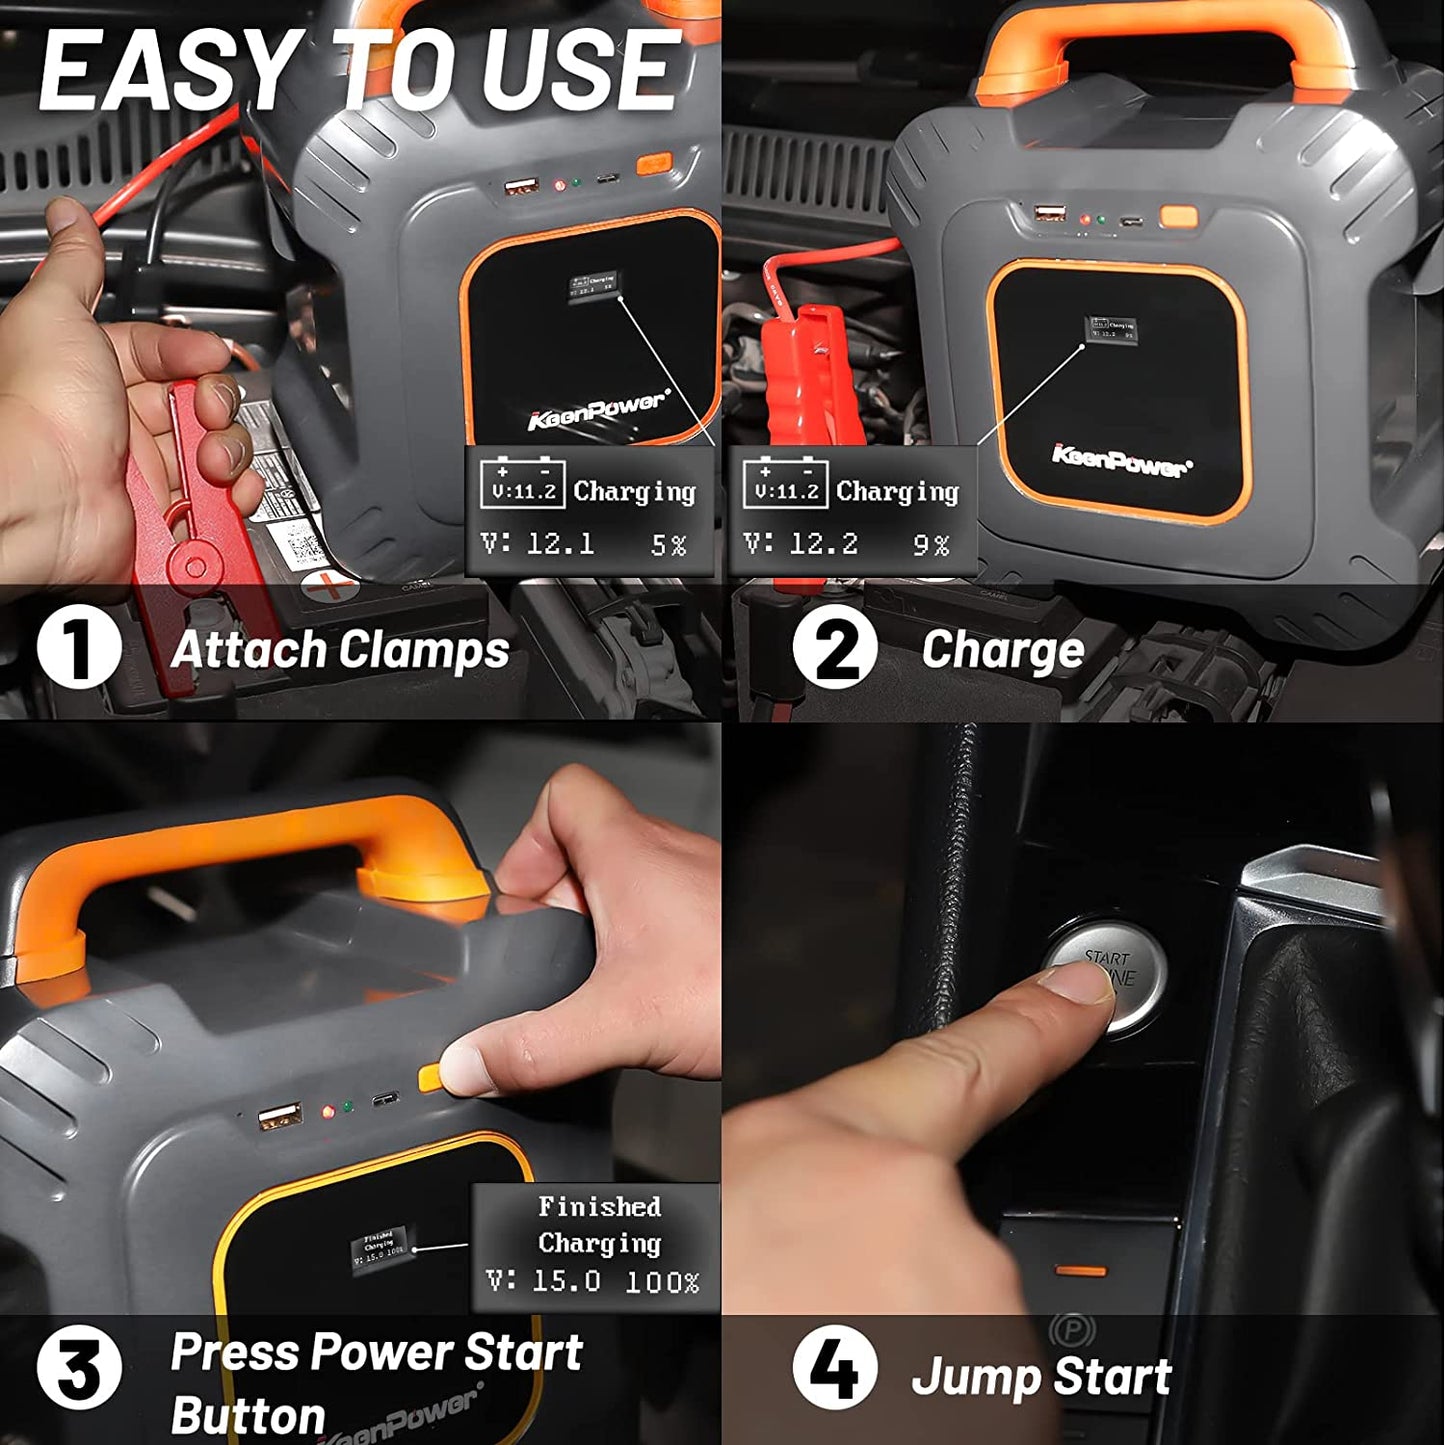 KeenPower SuperCap Portable Jump Starter 6000A Peak, Extremely Safe Super Capacitor Car Jump Starter Gasoline and Diesel Engines Up to 16-Liters